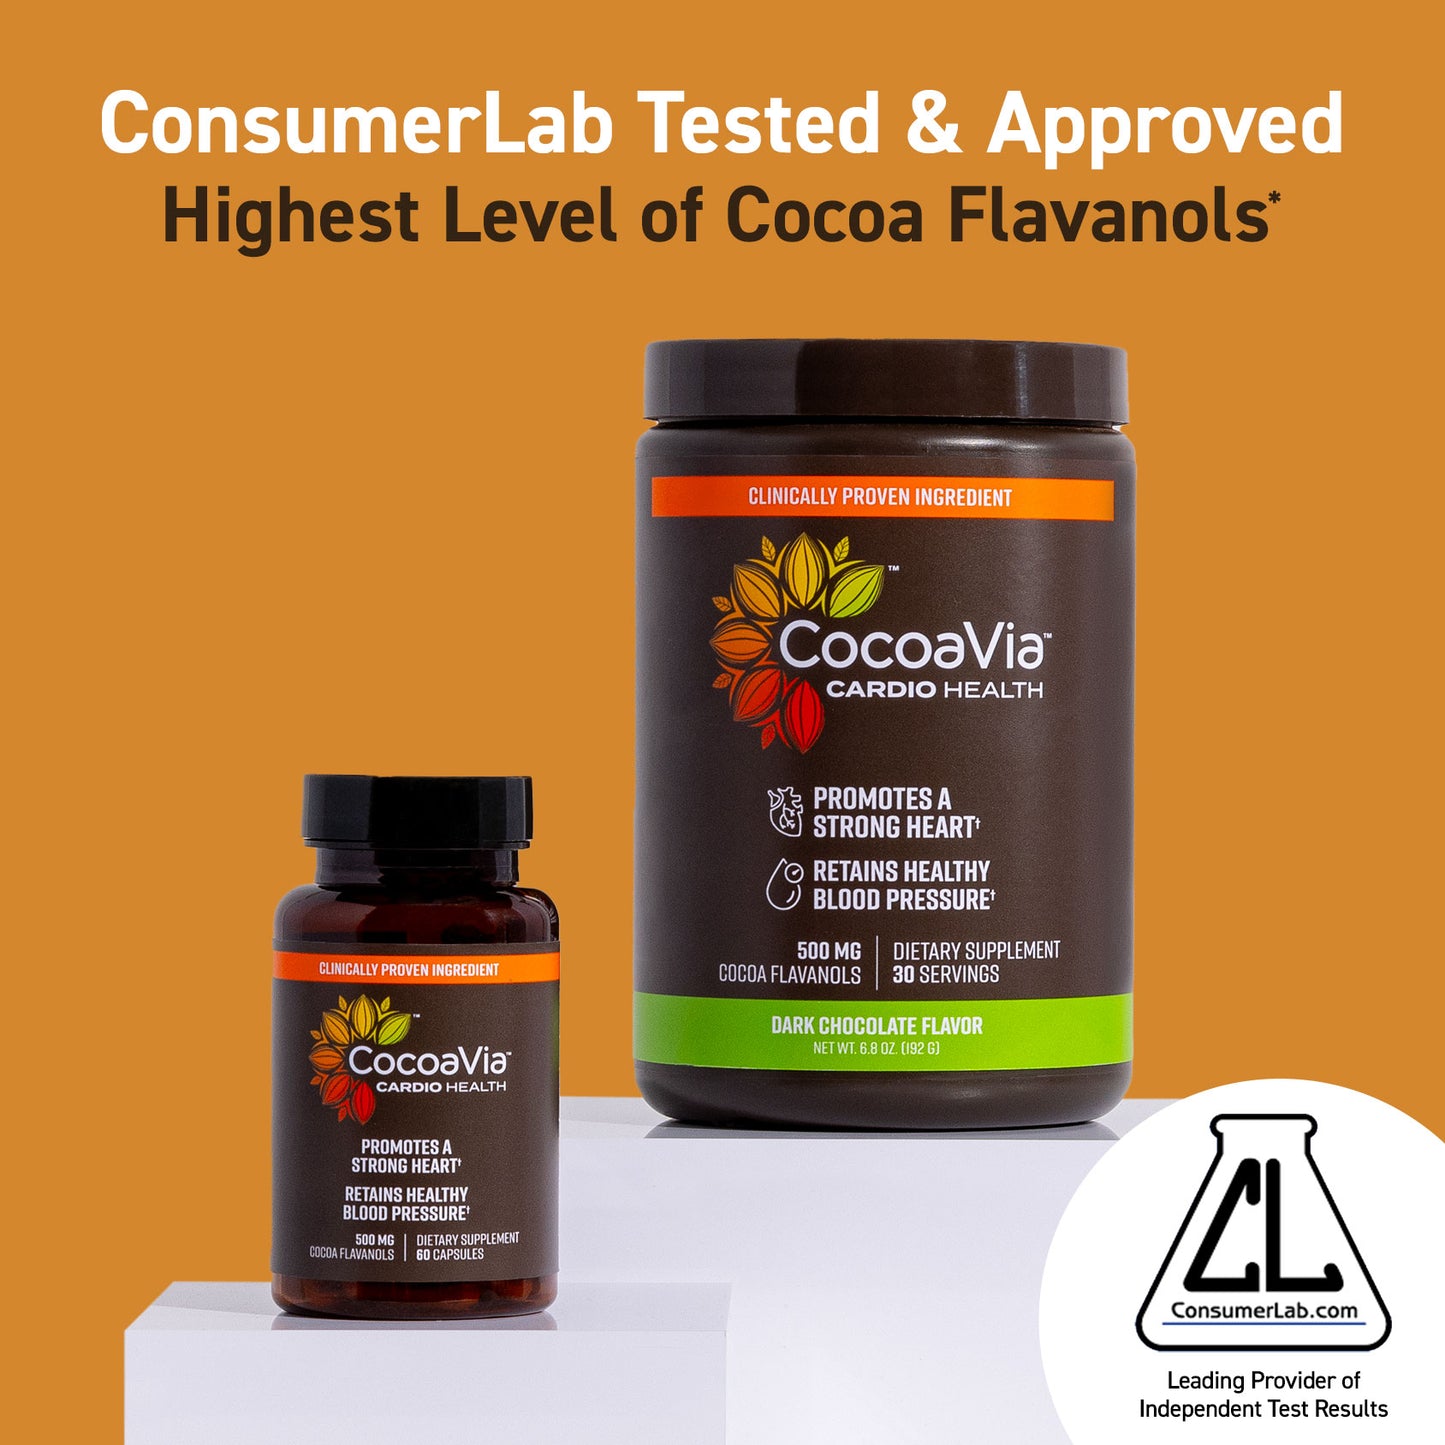 Consumerlab tested & approved. Highest level fo Cocoa Flavnols. *among 46 cocoa products tested